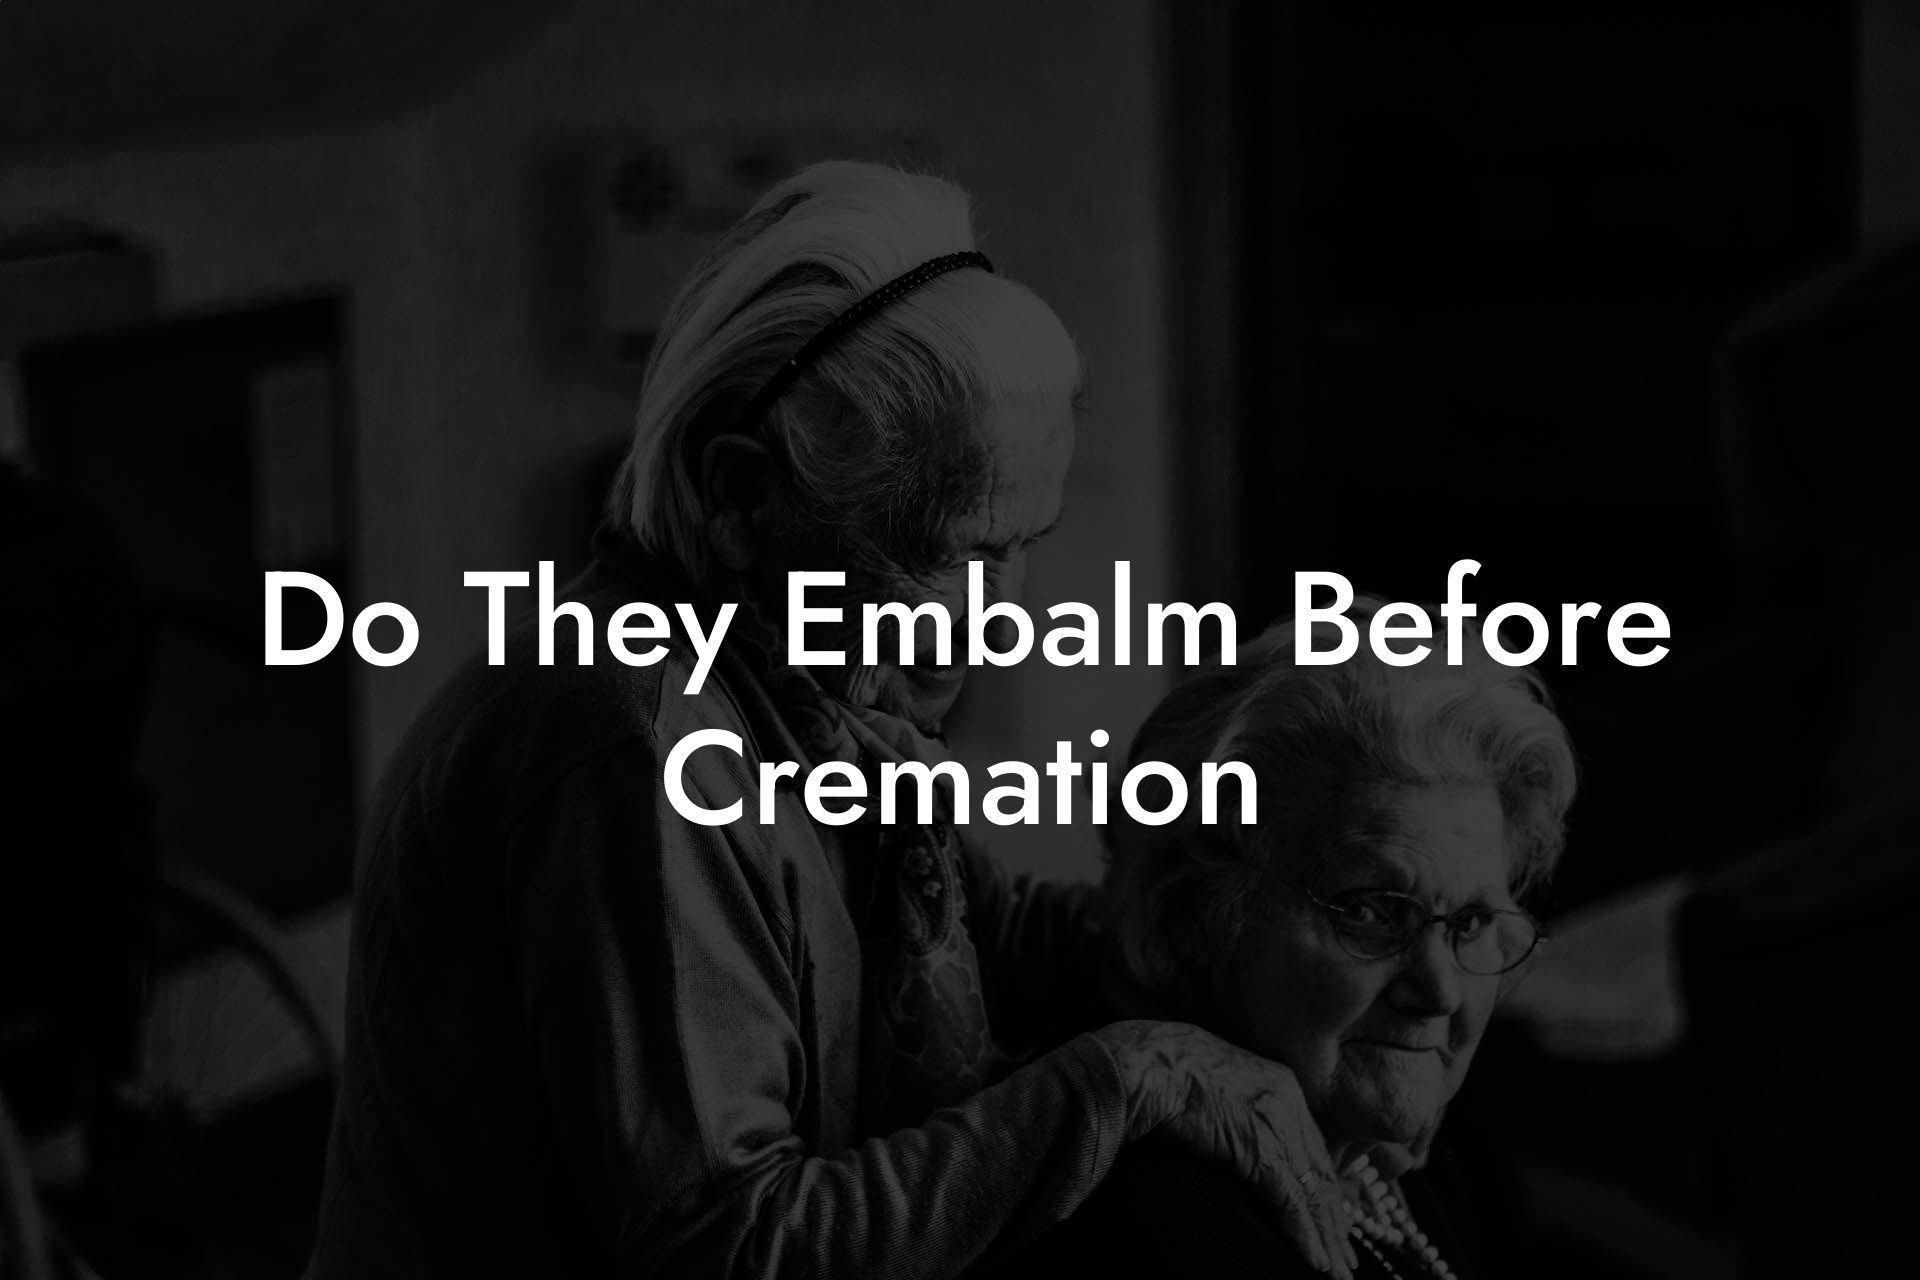 Do They Embalm Before Cremation